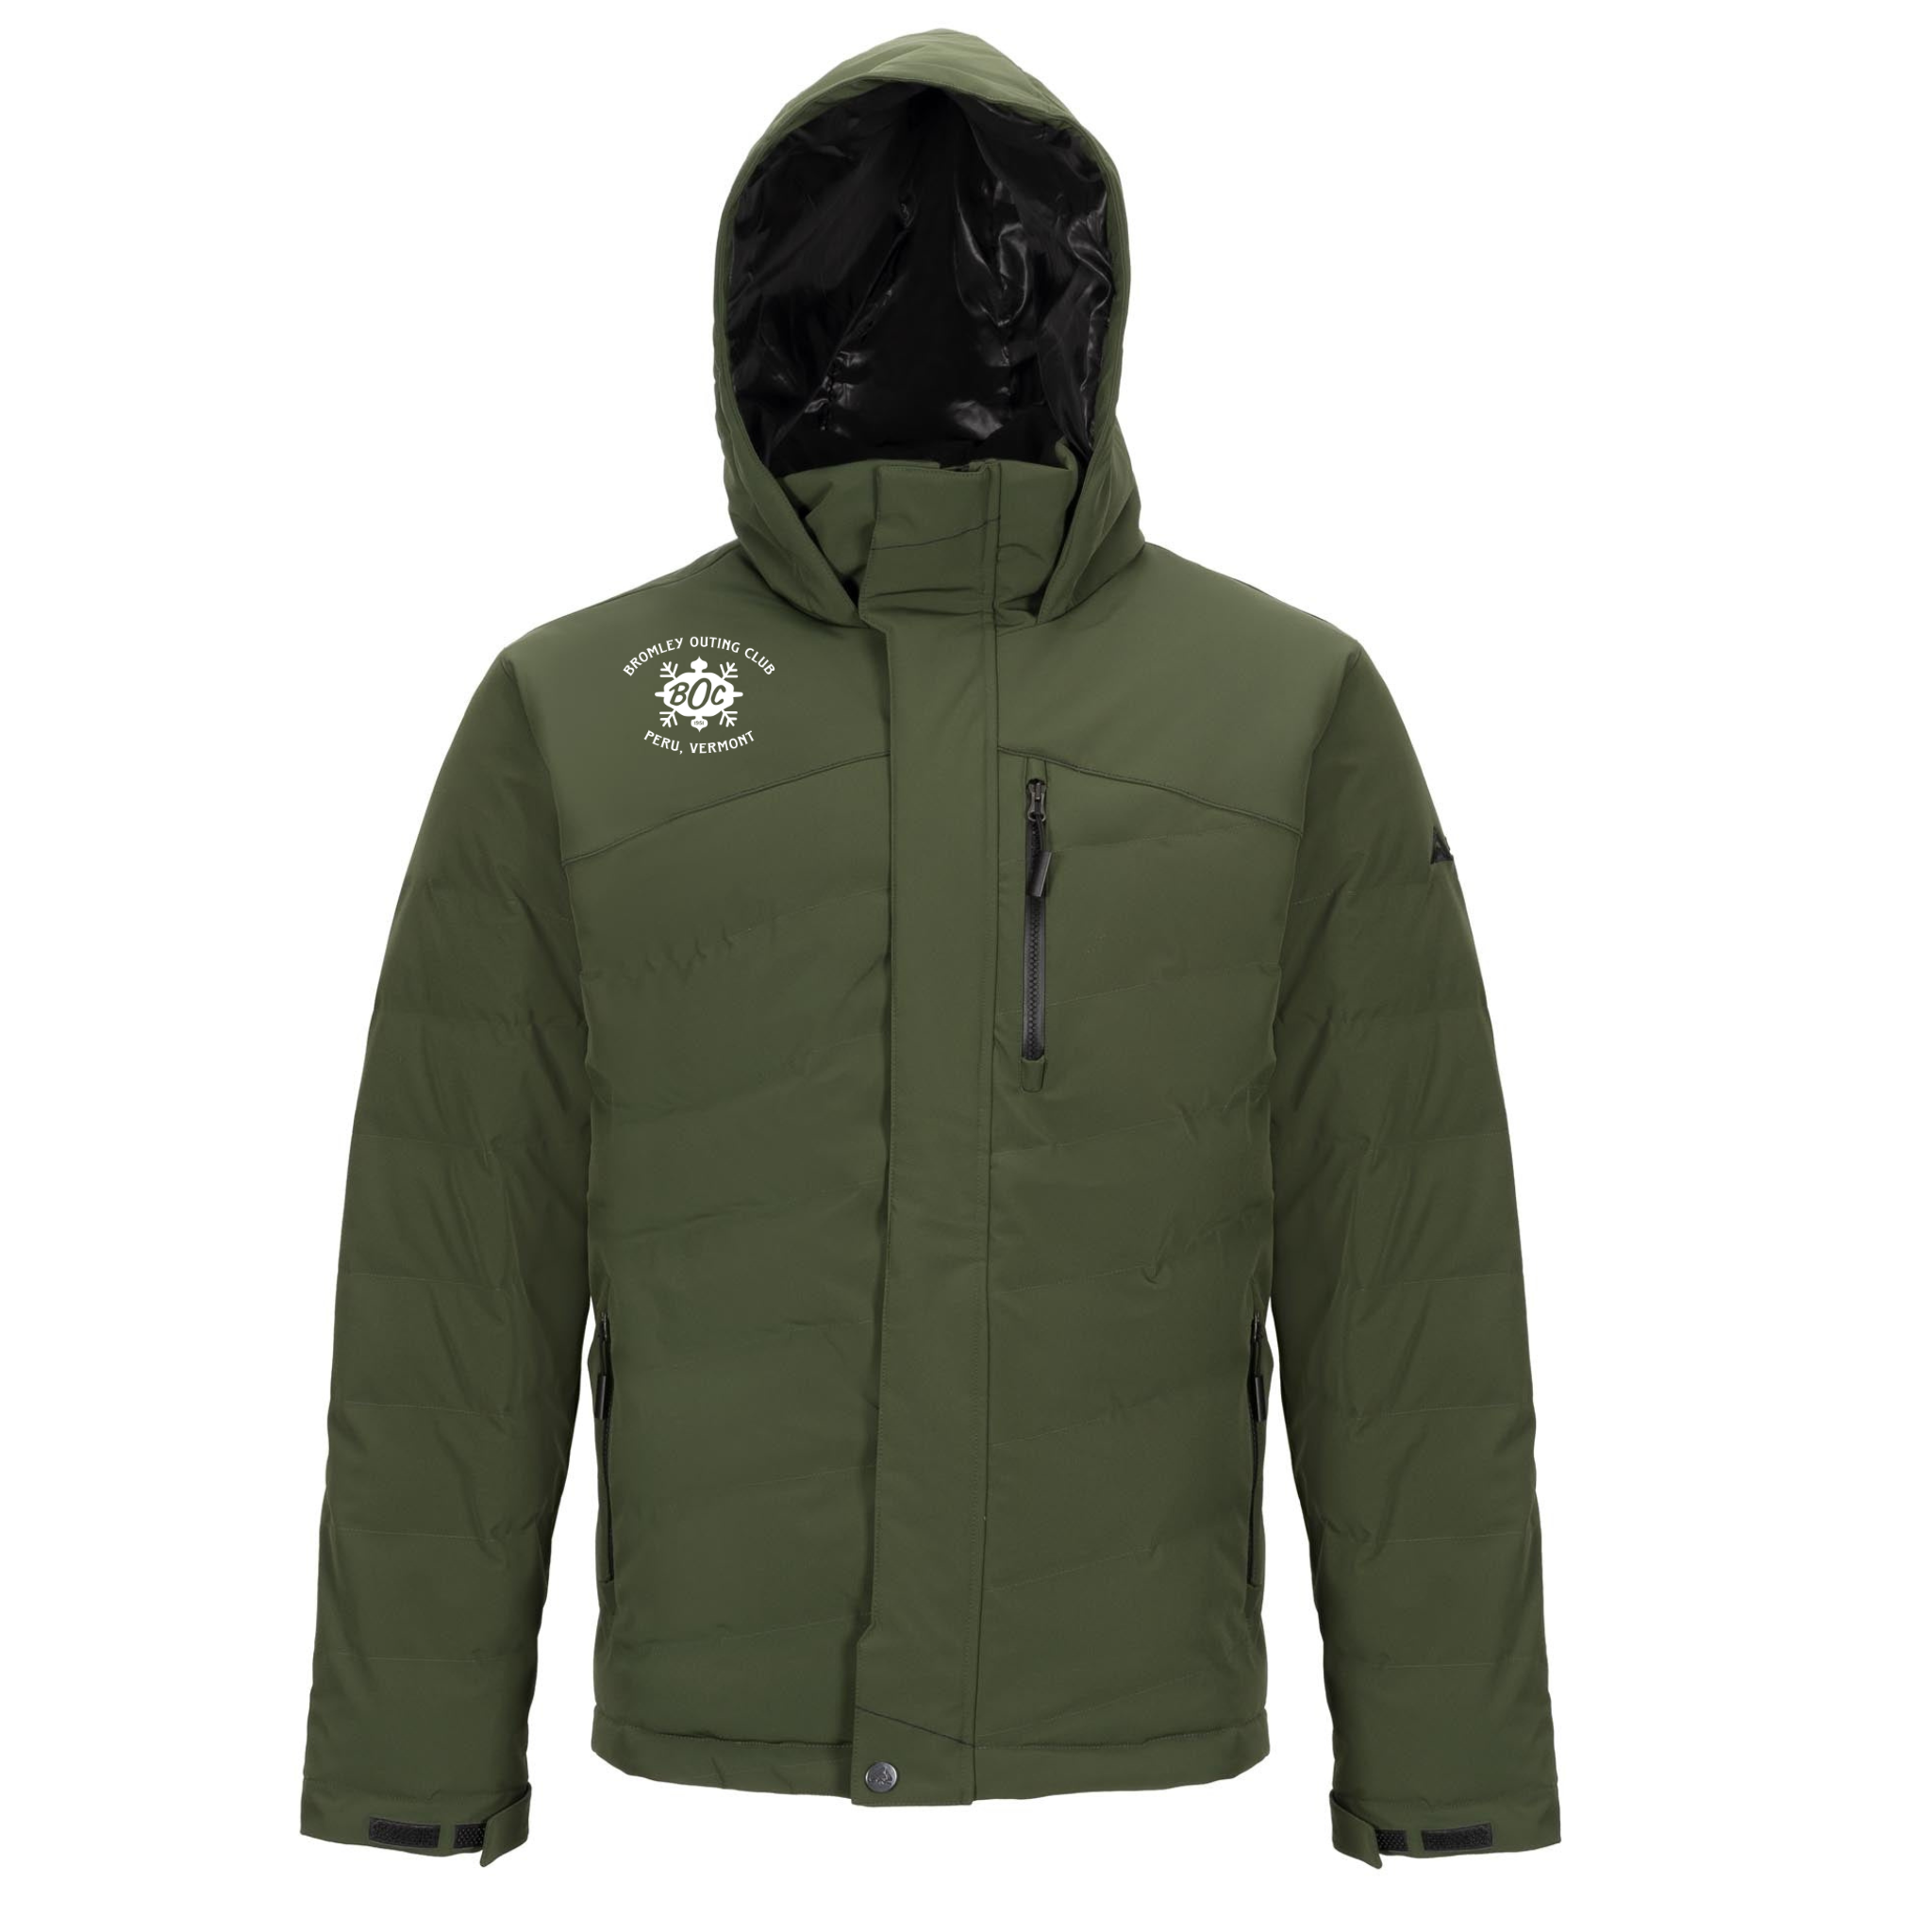 Men's Shelter Parka - Bromley Outing Club